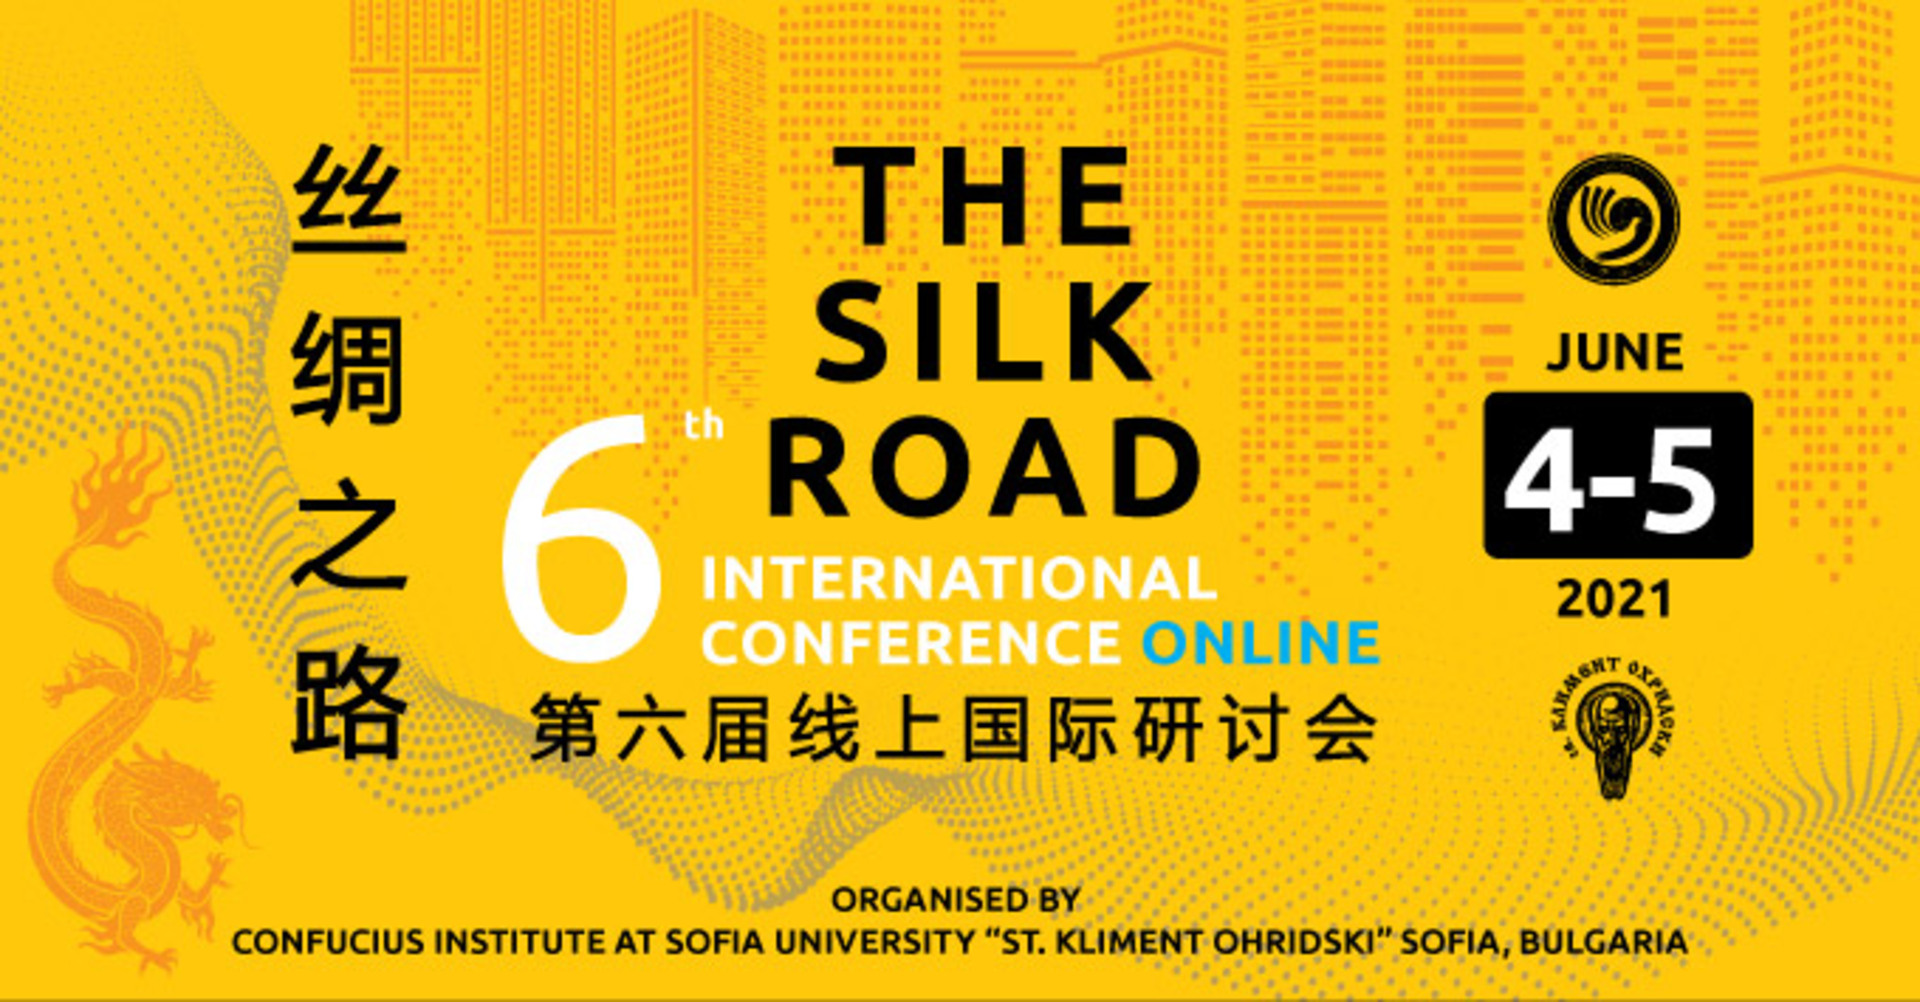 TheSilkRoad poster